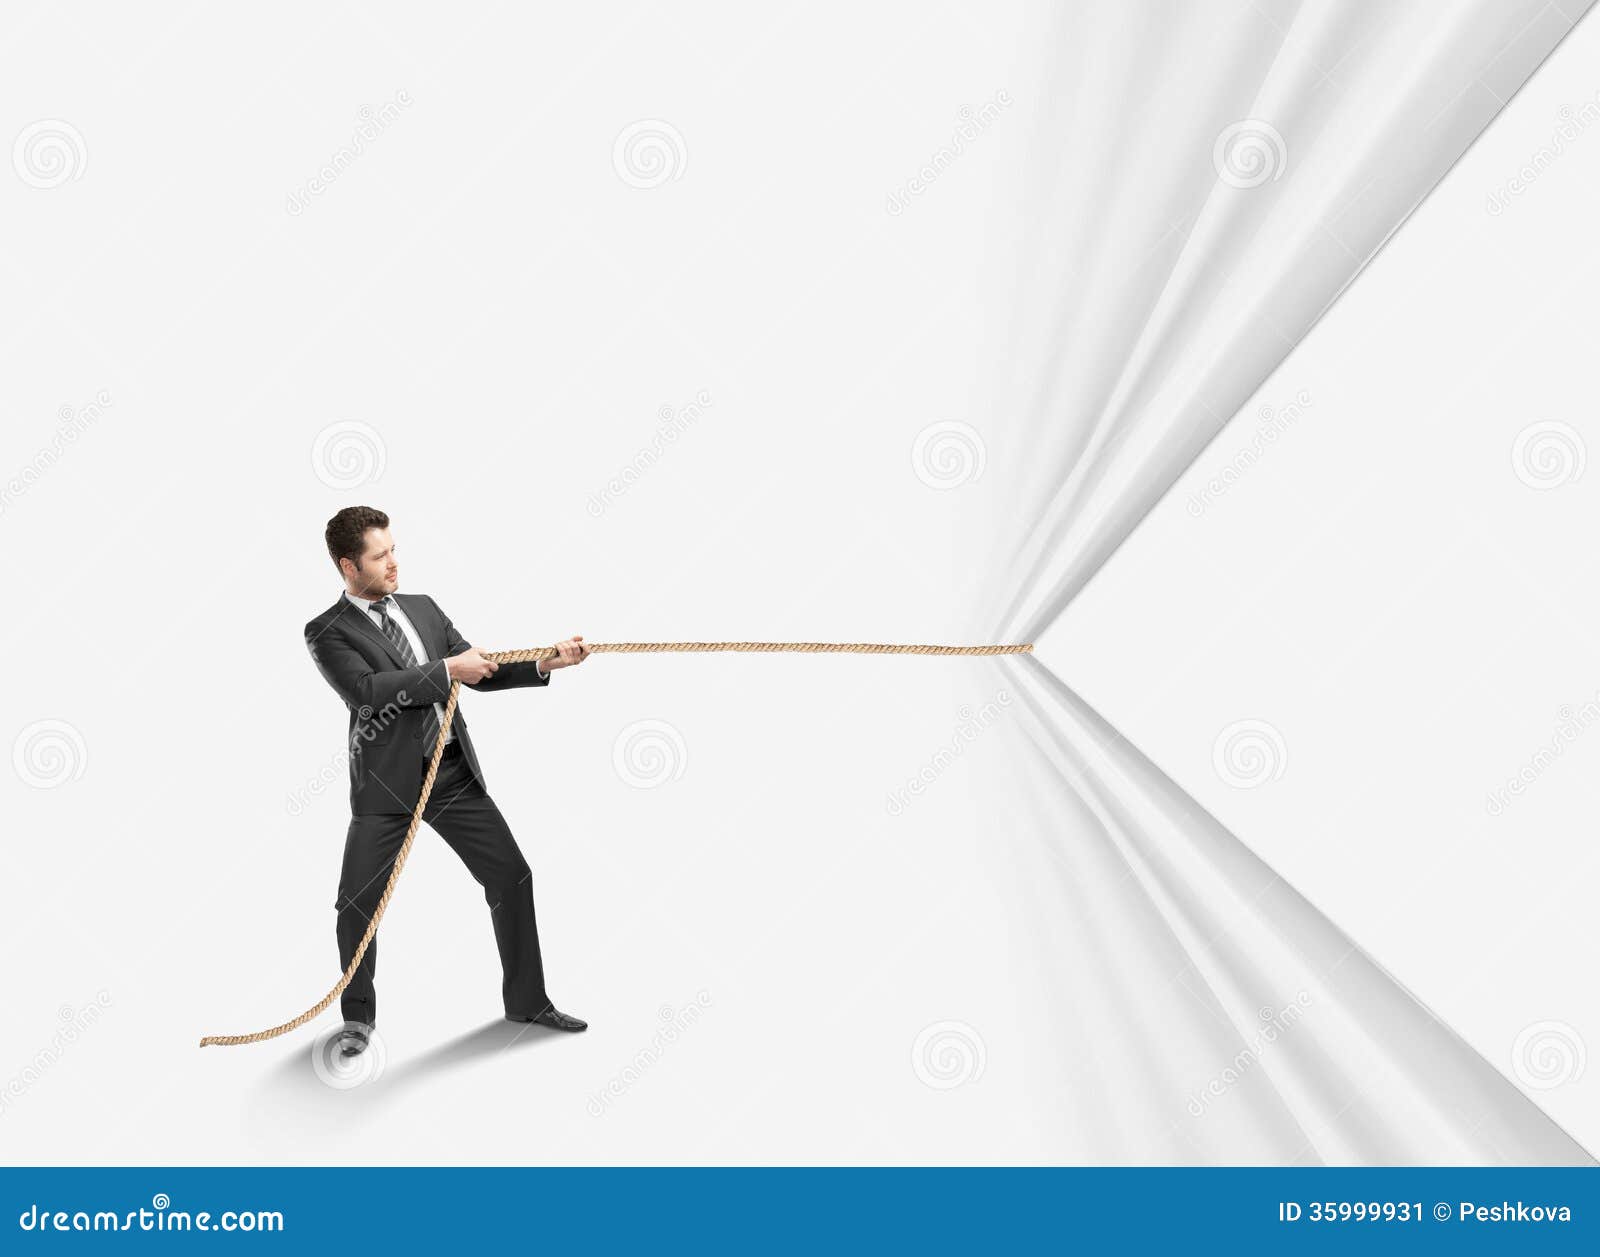 clipart man pulling rope - photo #31